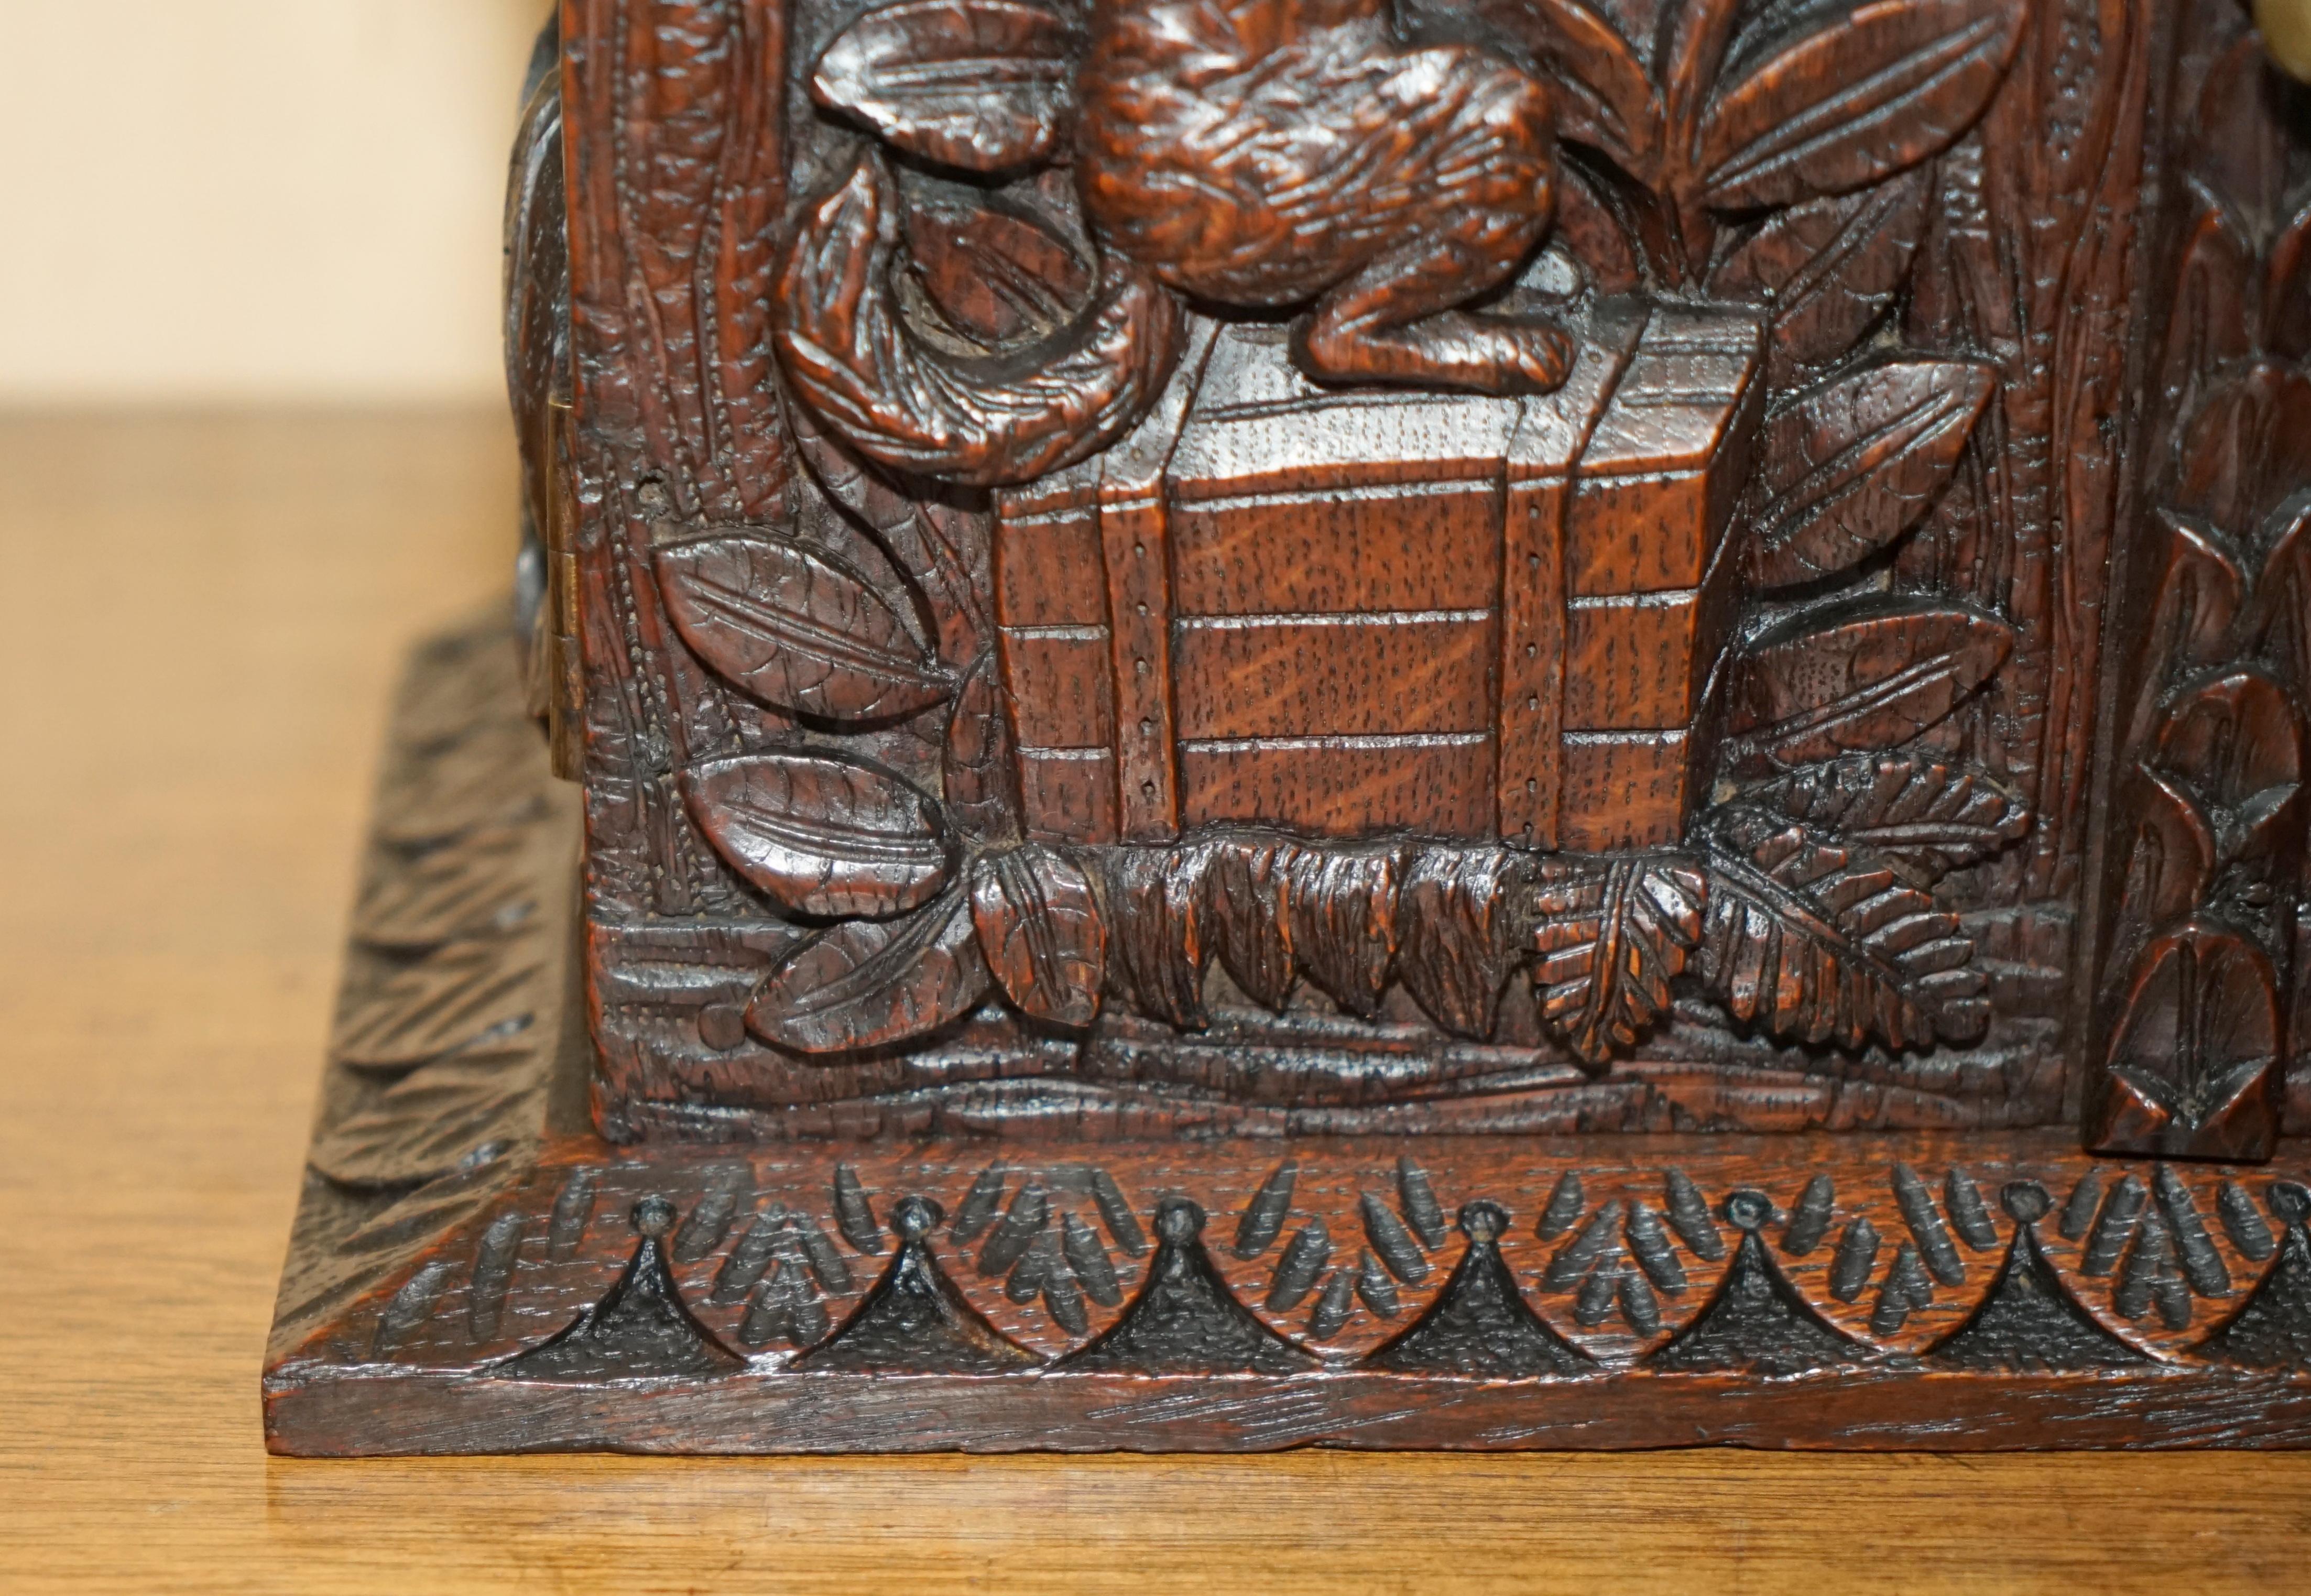 Hand-Carved CARVED BLACK FOREST WOOD SMOKiNG PIPE CABINET BOX LATIN INSCRIBED NIL NISI CRUCE For Sale